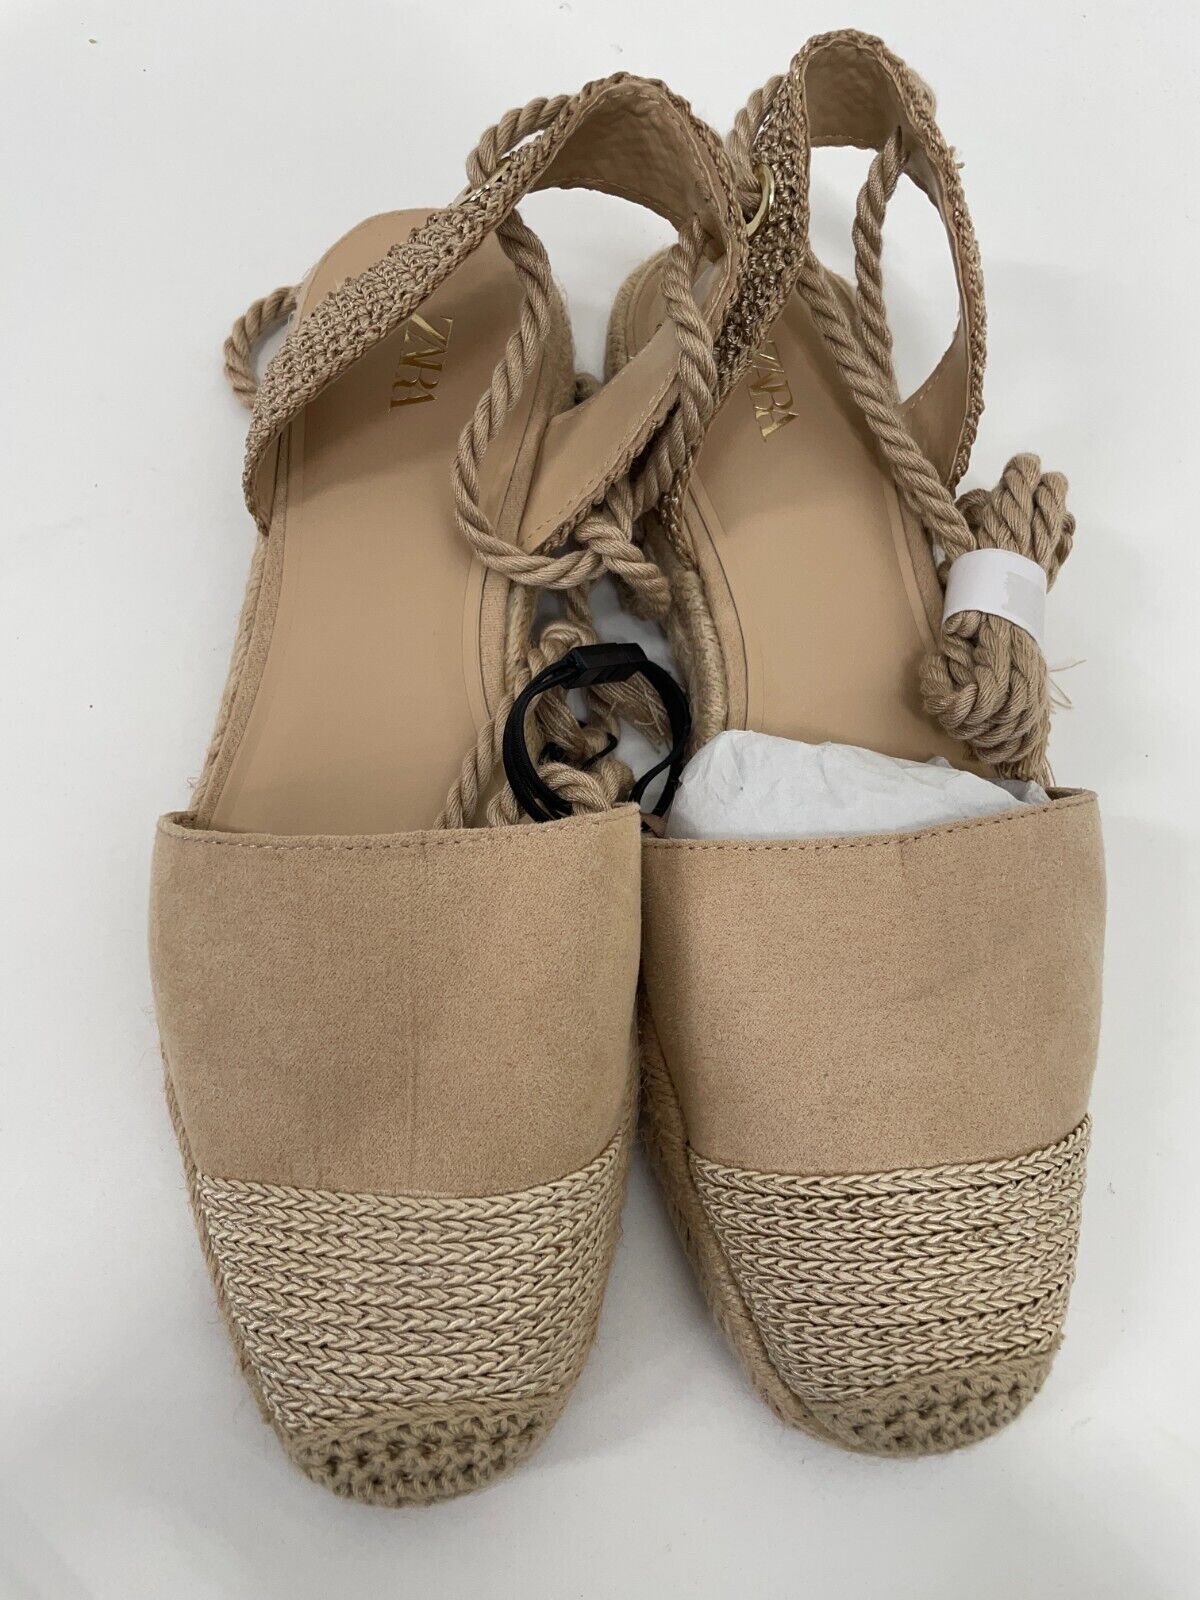 Zara Womens 7.5 Mixed Lace-Up Espadrilles Sandals Tan Round Toe 2511/110/202